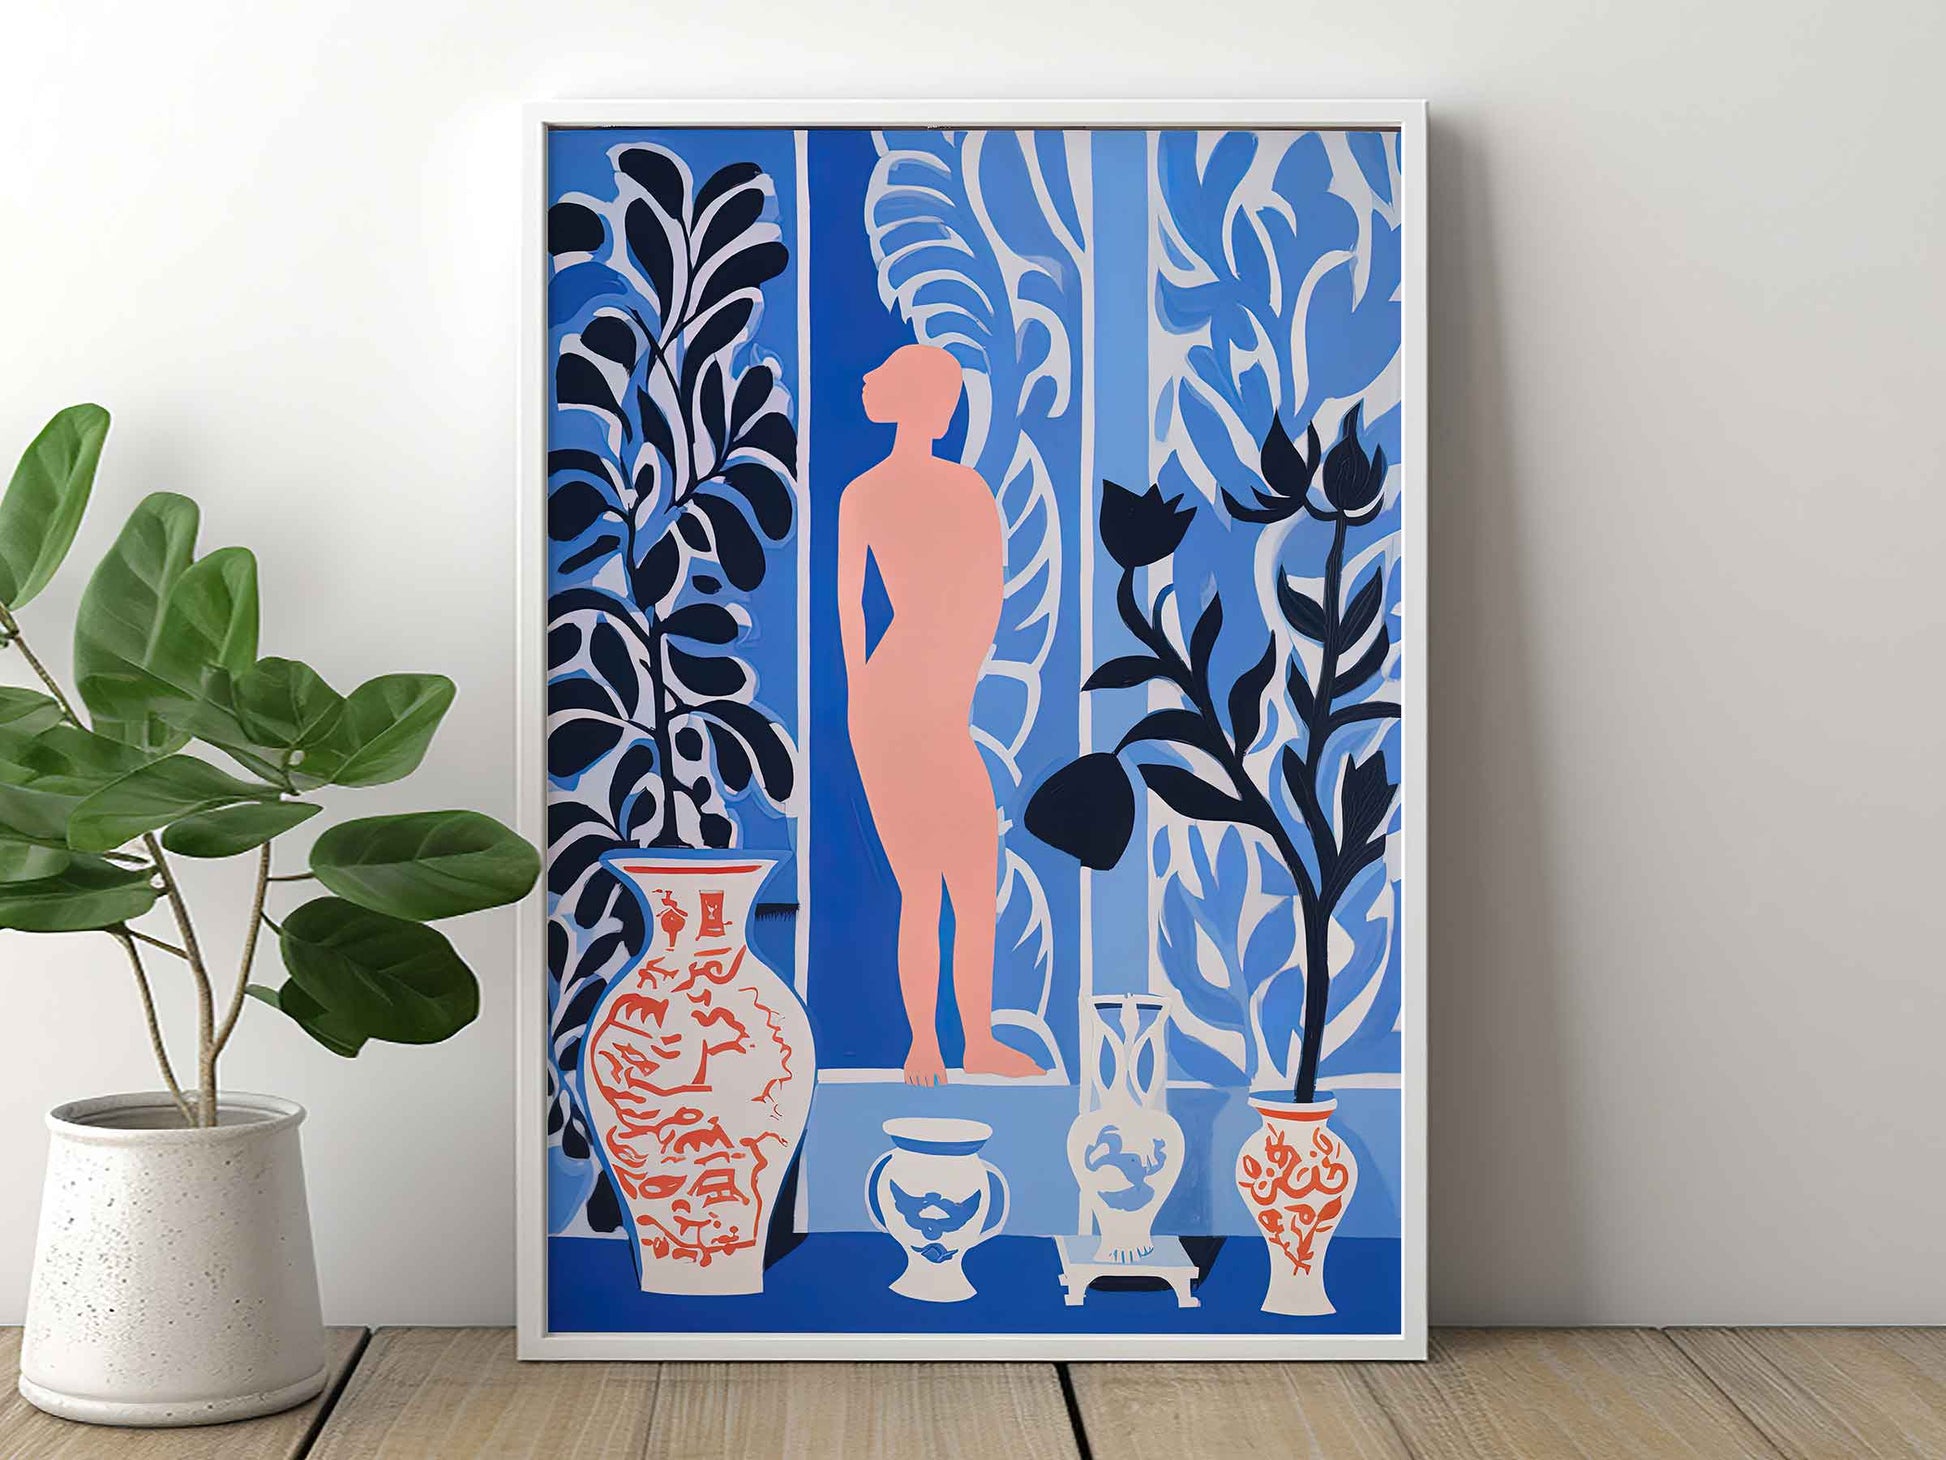 Framed Image of Matisse Art Poster Style Wall Print Blue Themed Oil Paintings